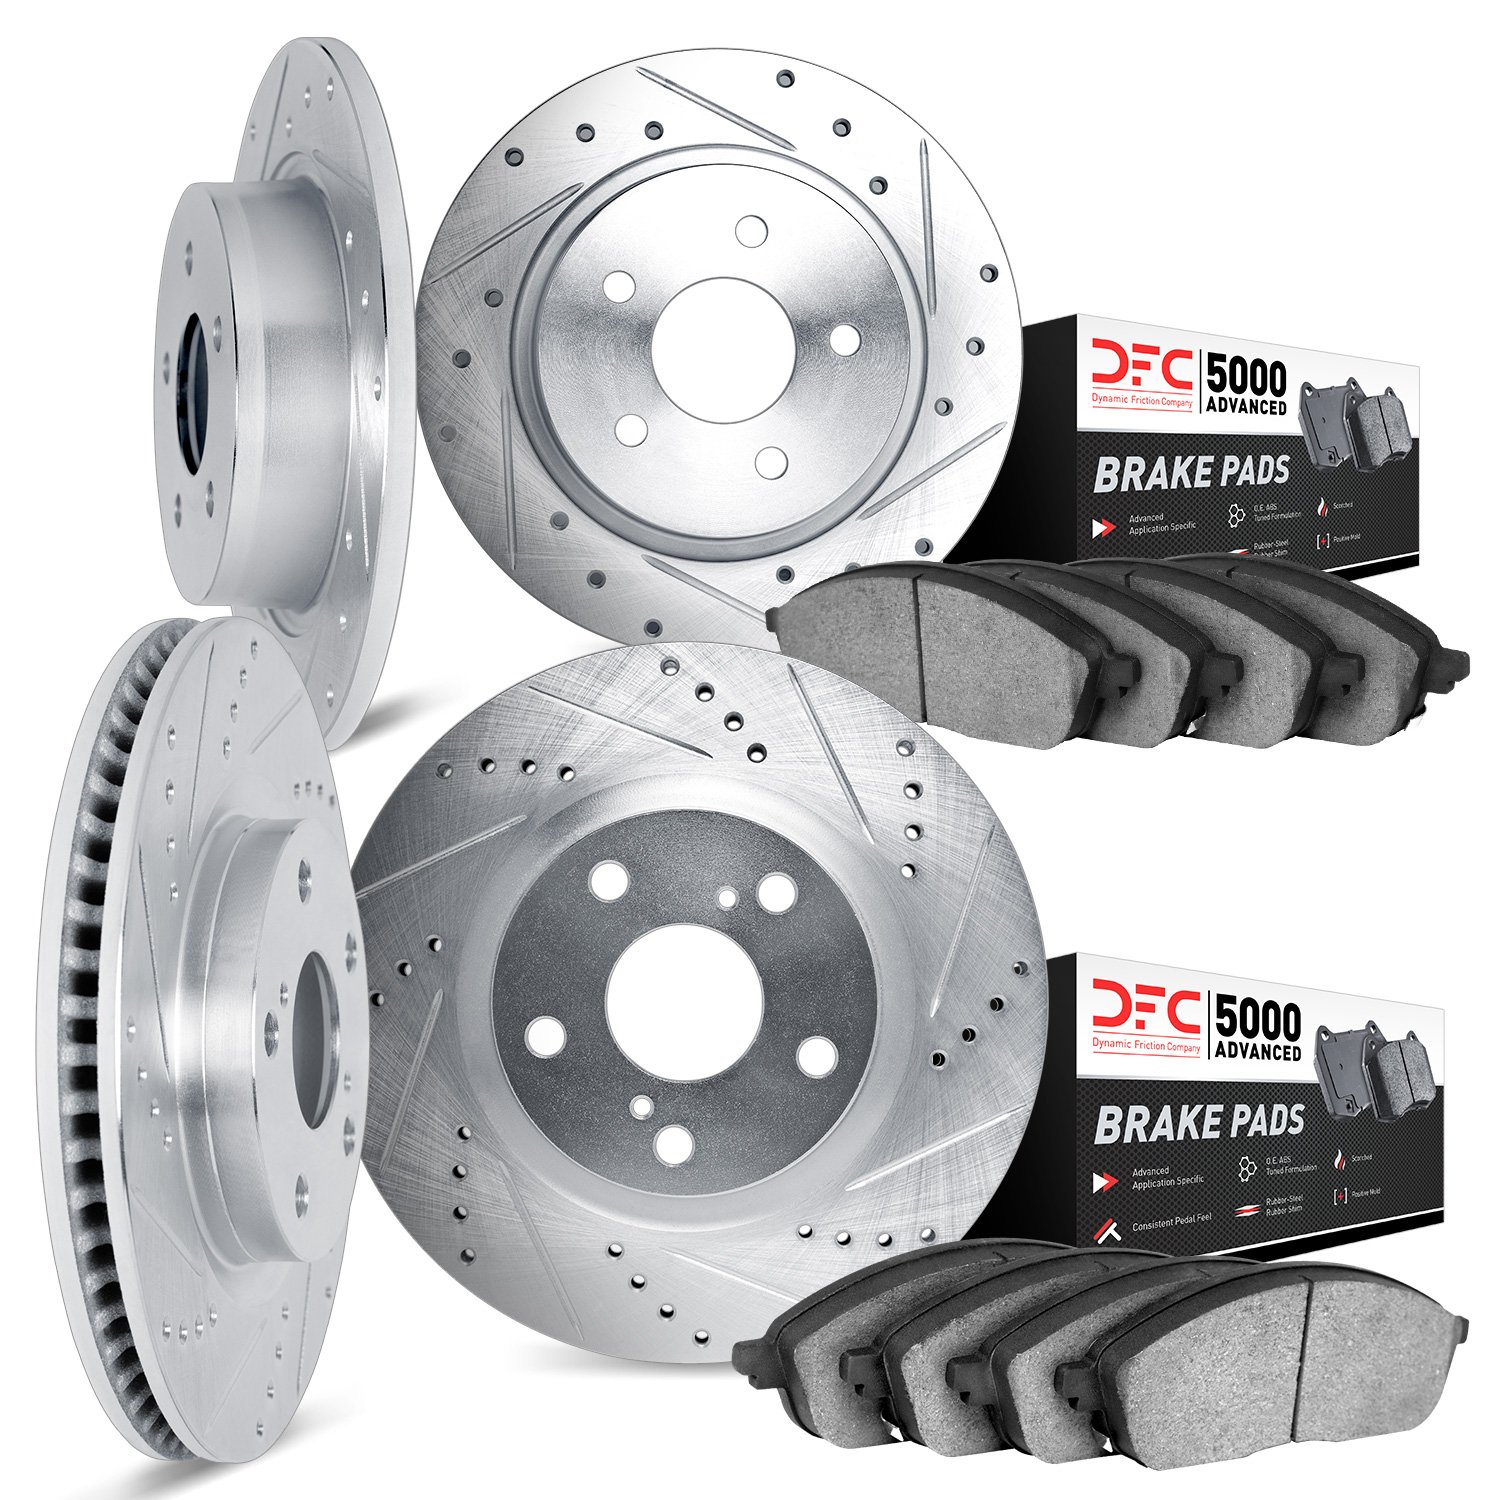 7504-80050 Drilled/Slotted Brake Rotors w/5000 Advanced Brake Pads Kit [Silver], 2013-2015 Ford/Lincoln/Mercury/Mazda, Position: